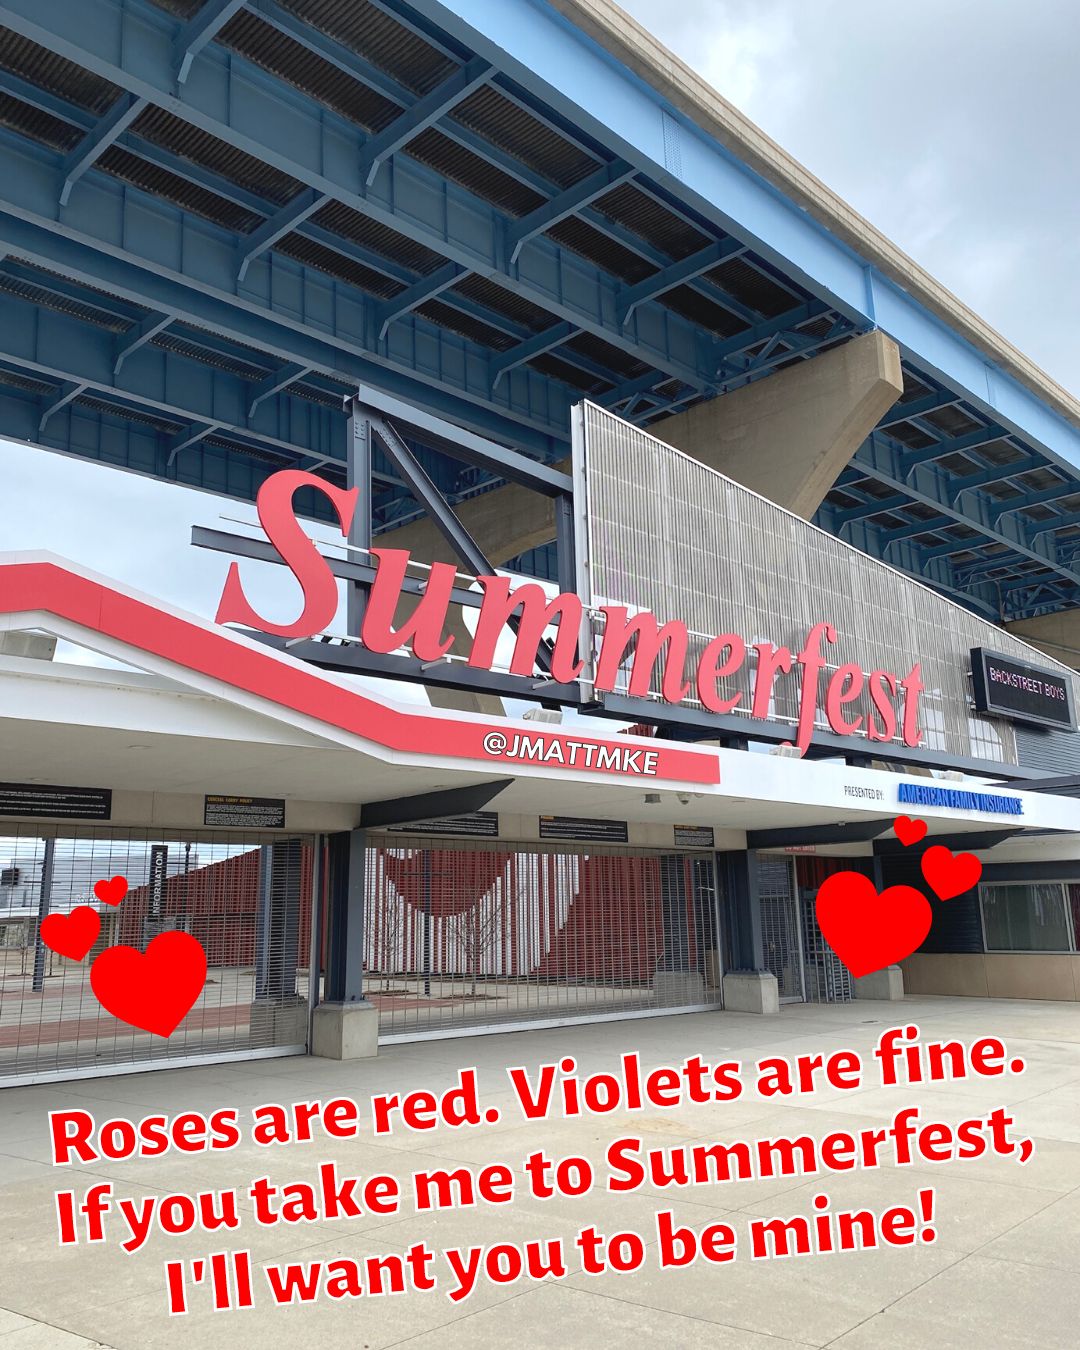 “Roses are red. Violets are fine. If you take me to Summerfest, I’ll want you to be mine!”